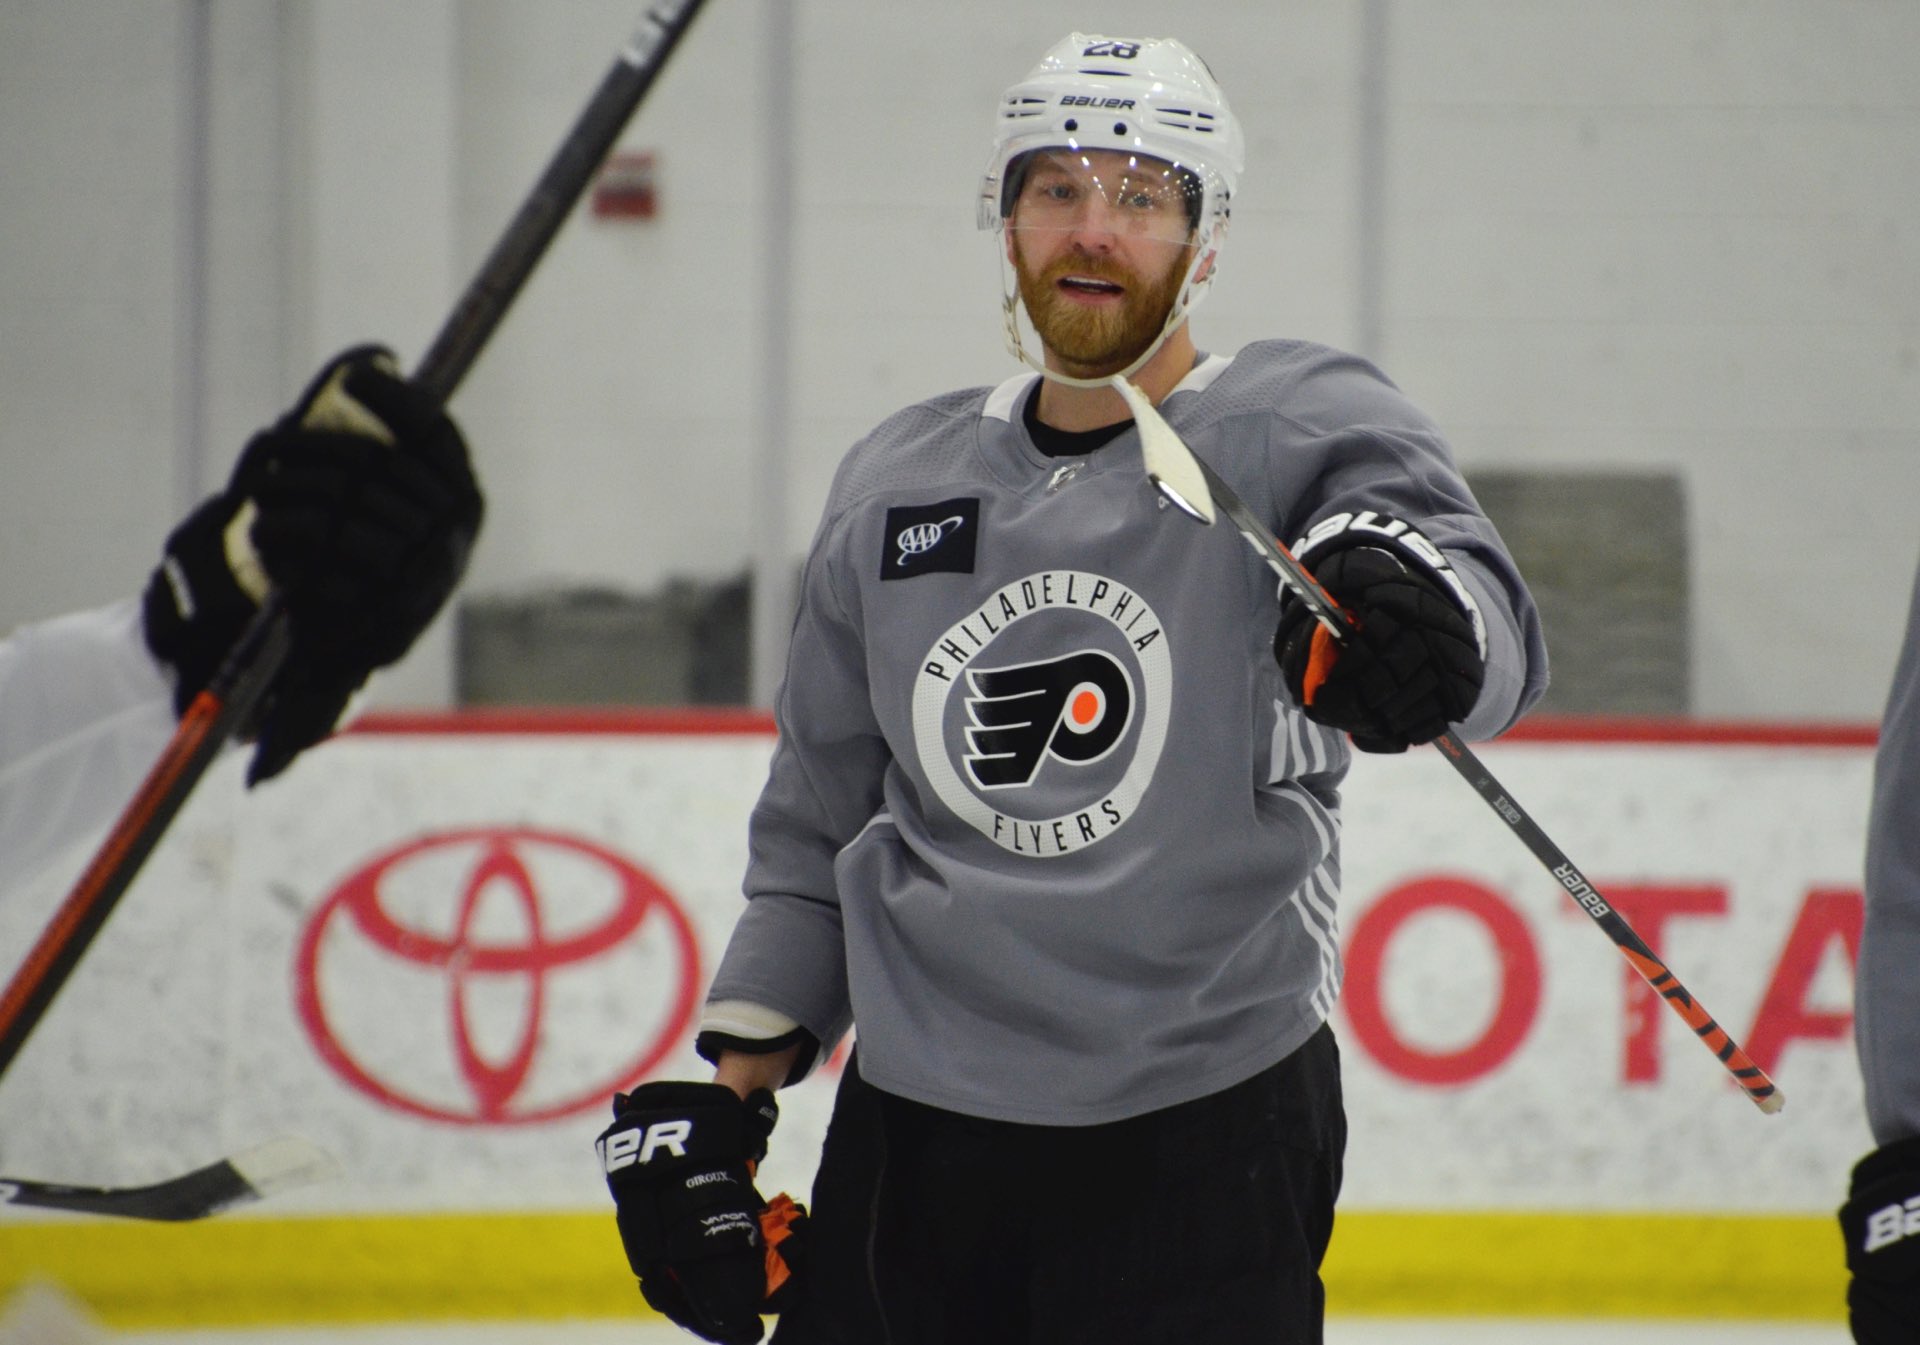 Jakub Voracek had the greatest reaction to seeing the Flyers' new